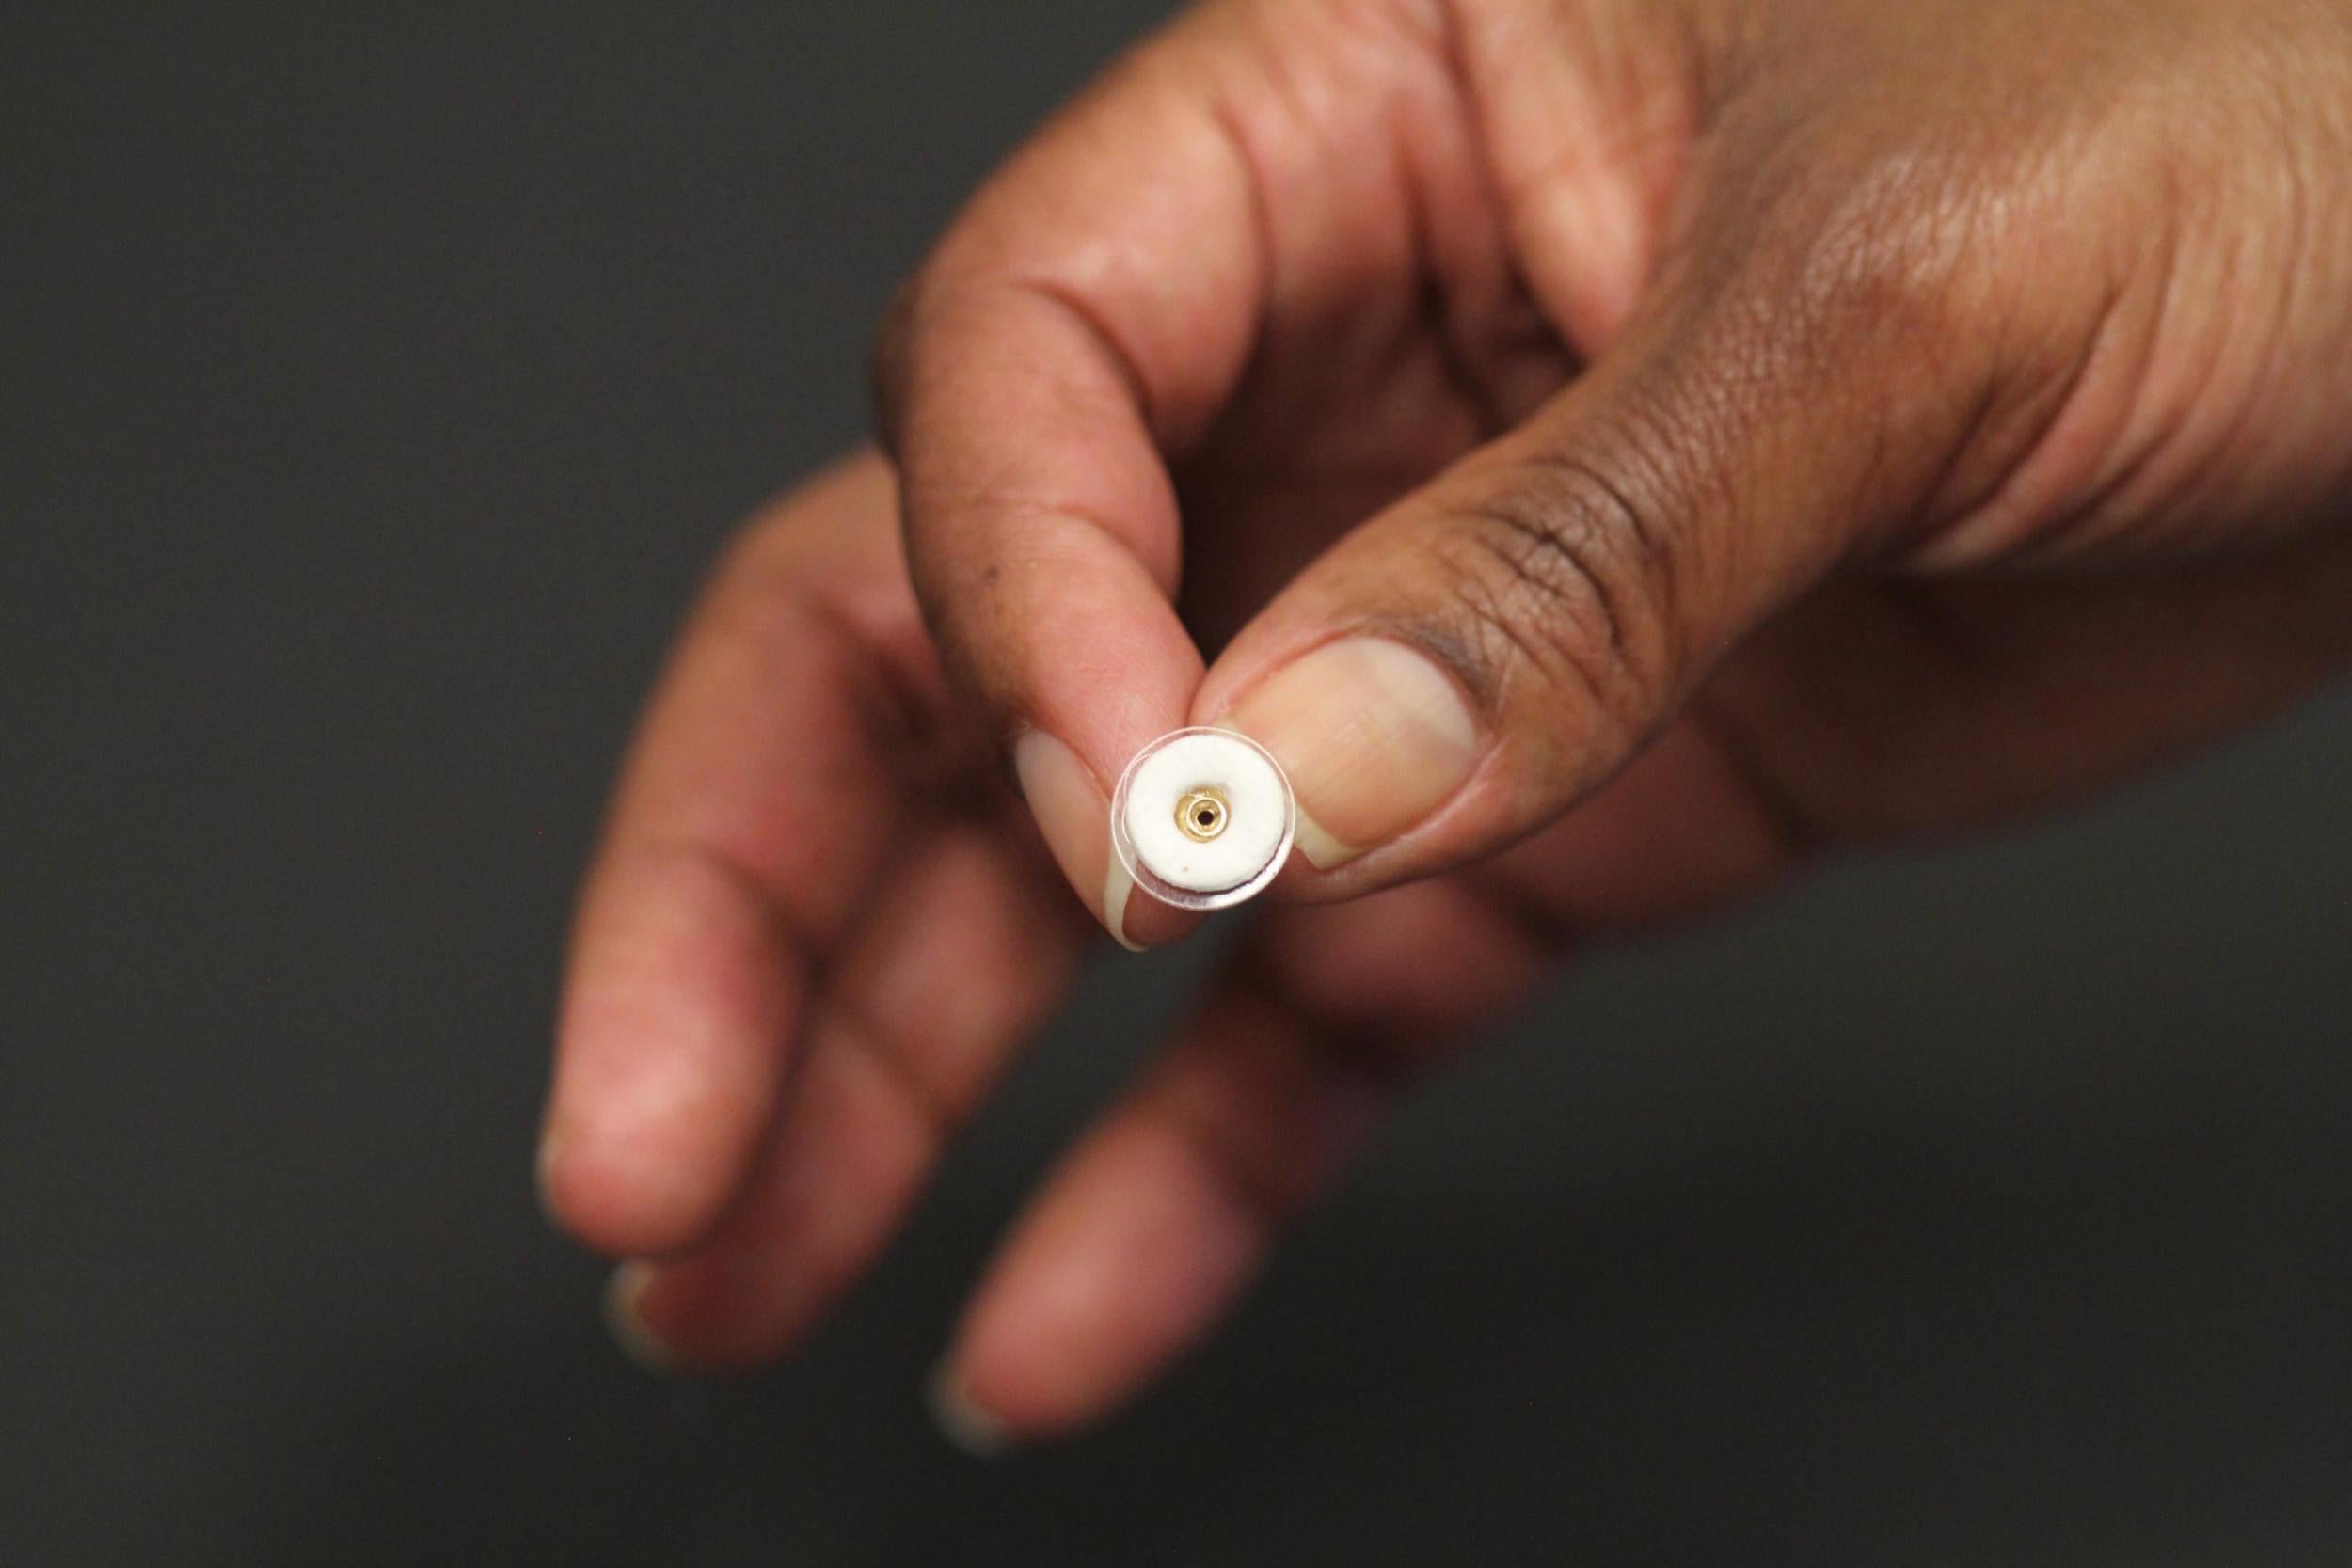 This photograph shows an earring patch (white) that can deliver contraceptive hormone while being worn on an earring back